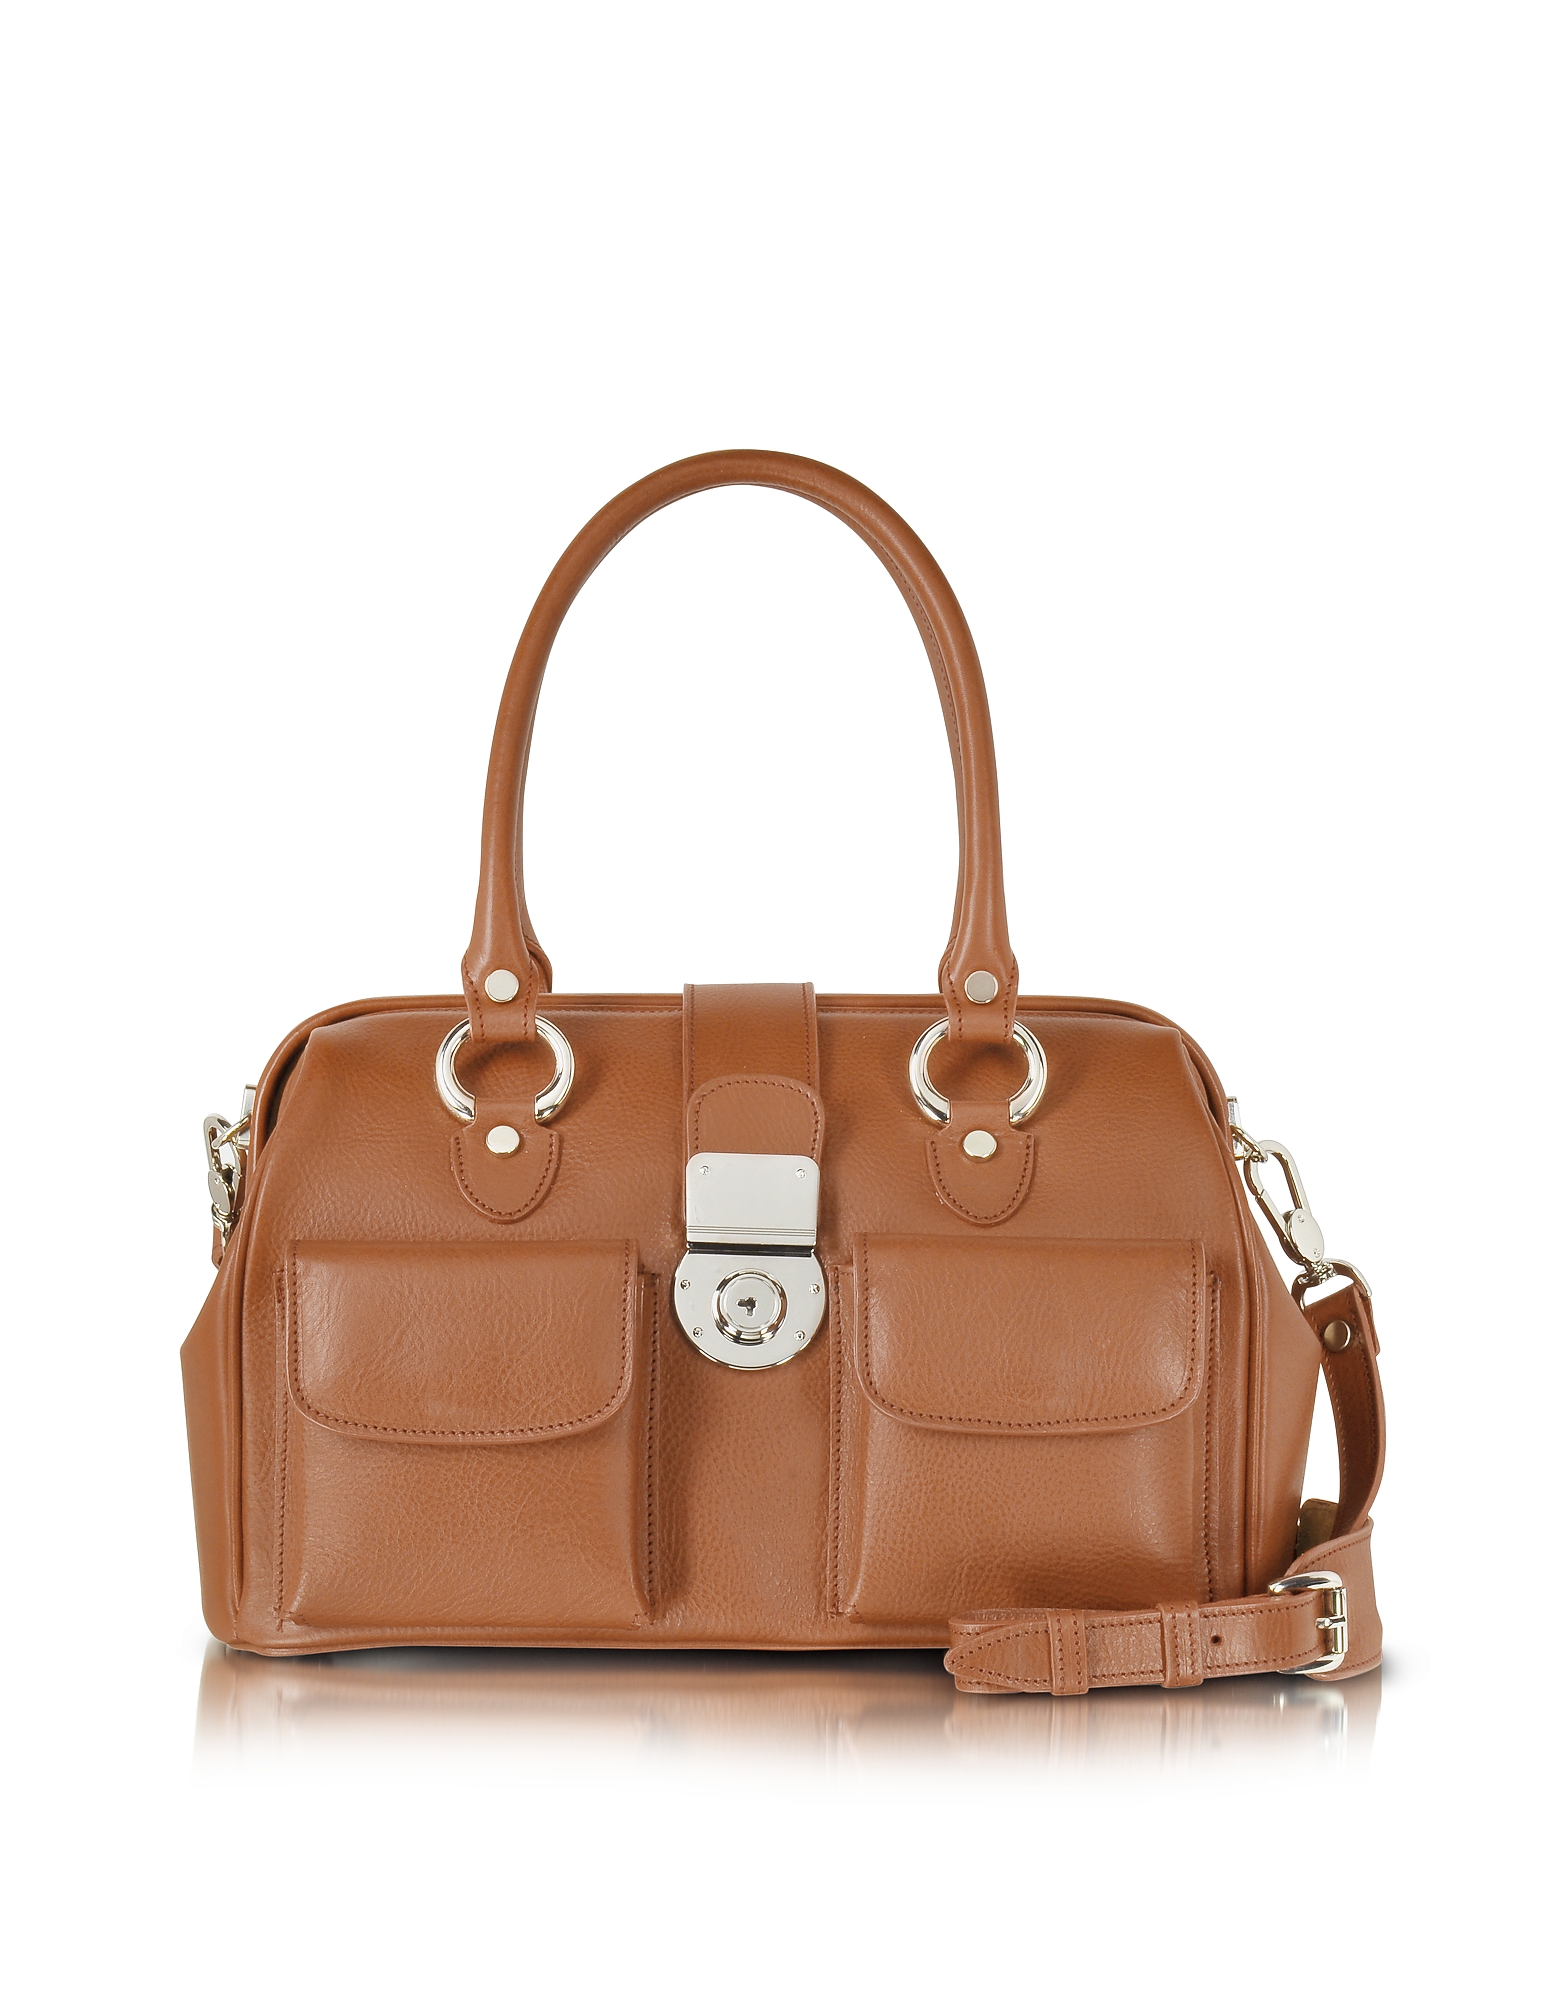 For a polished edge to your look, this structured doctor style leather handbag is roomy enough to ho